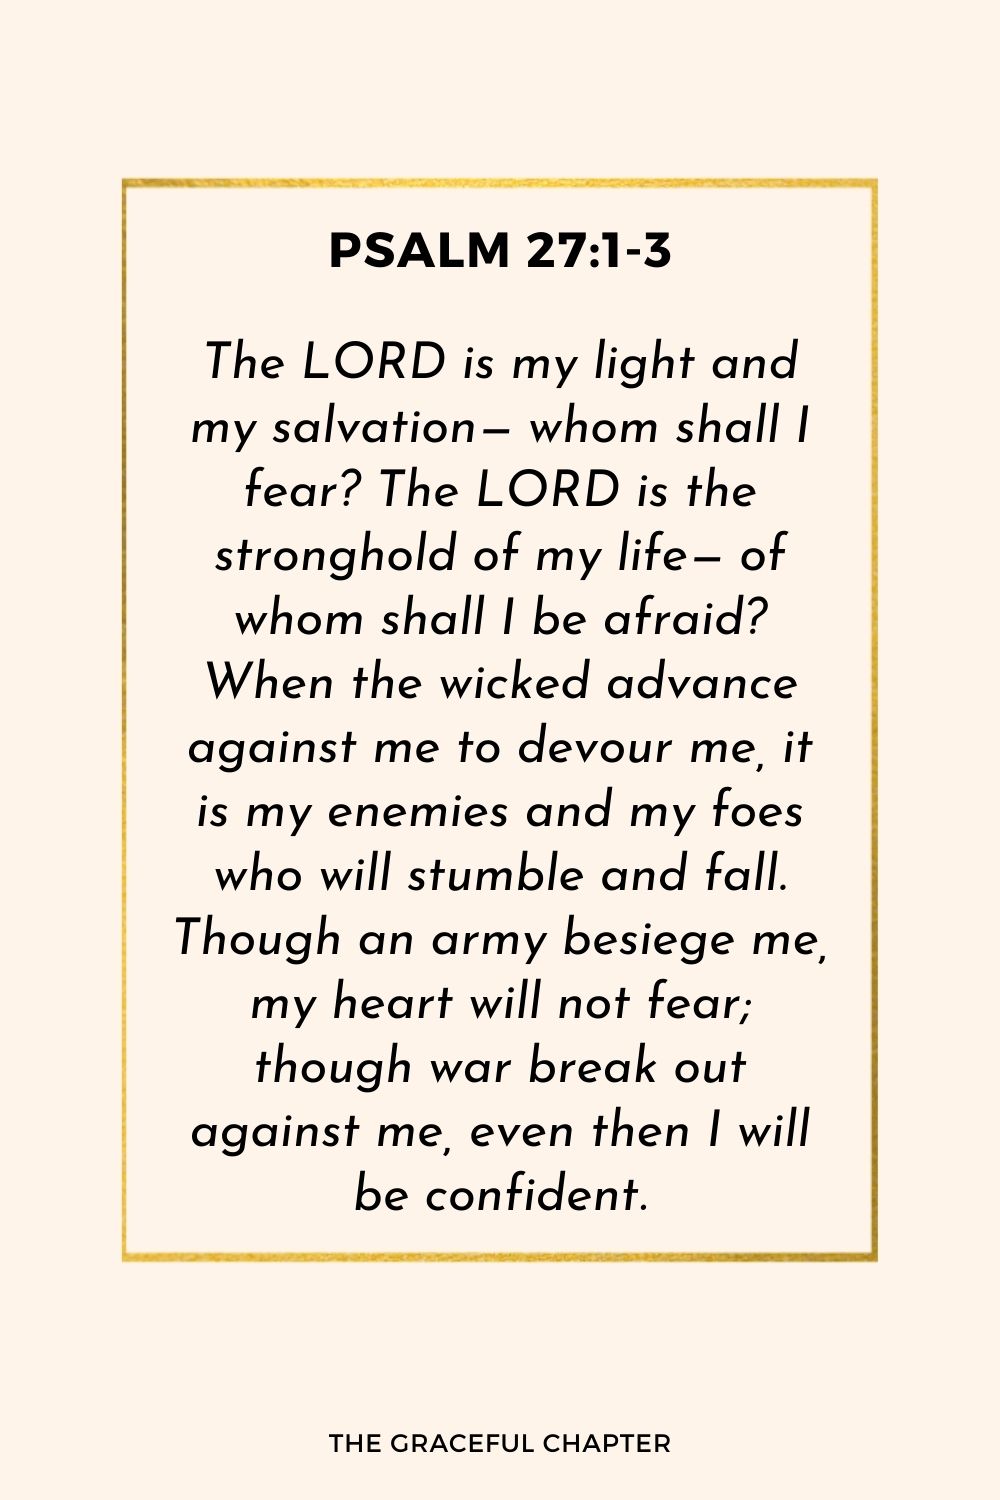 The LORD is my light and my salvation— whom shall I fear? The LORD is the stronghold of my life— of whom shall I be afraid? When the wicked advance against me to devour me, it is my enemies and my foes who will stumble and fall. Though an army besiege me, my heart will not fear; though war break out against me, even then I will be confident.